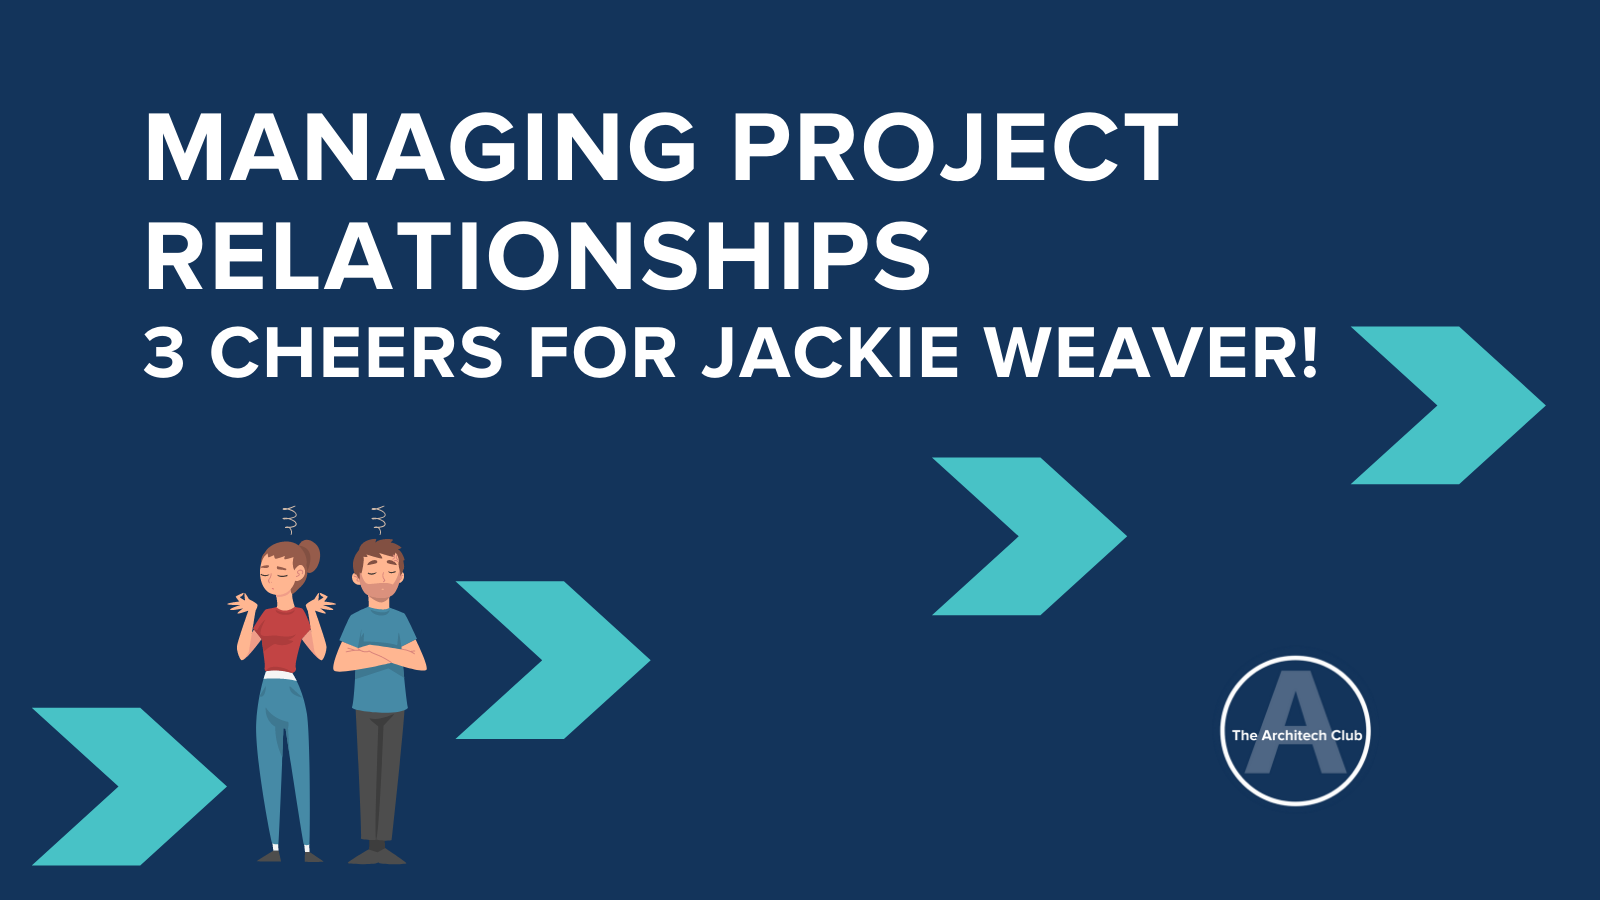 Managing project relationships 3 cheers for Jackie Weaver